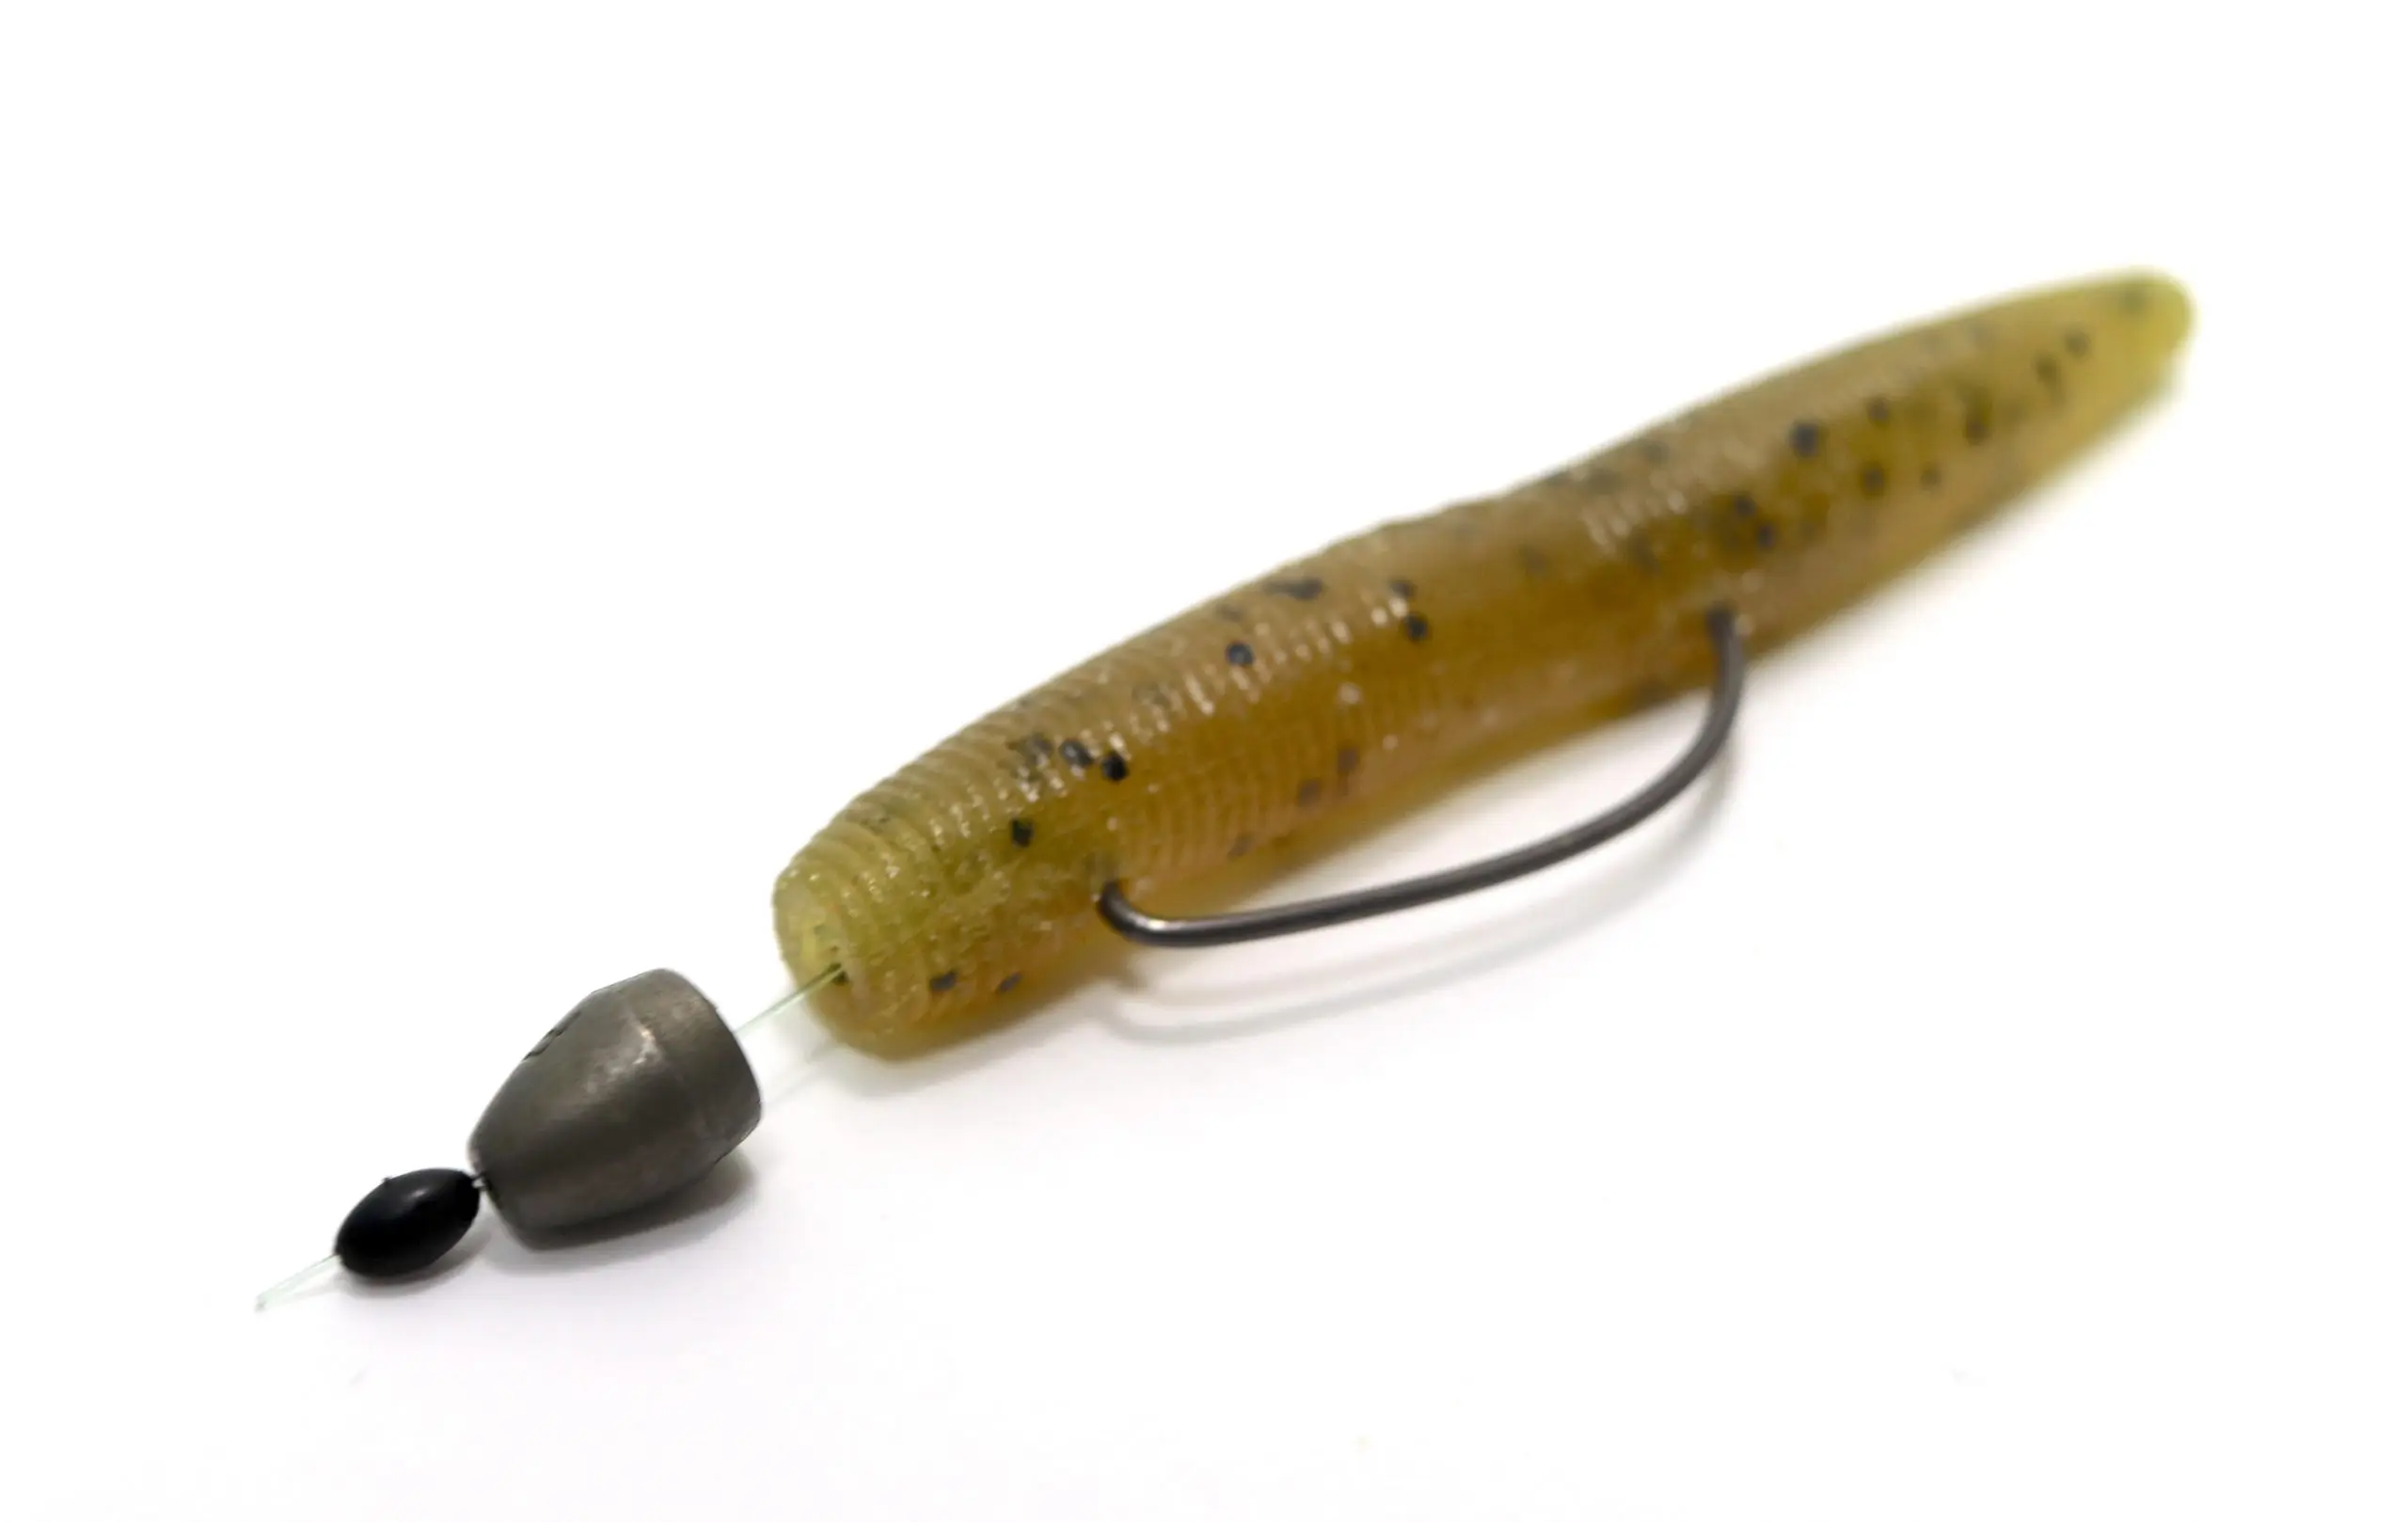 Jerry Dart Unpainted Blanks Casting Fishing Lure 17g 25g Heave Ice Fishing  Spoon Baits For Pike Perch